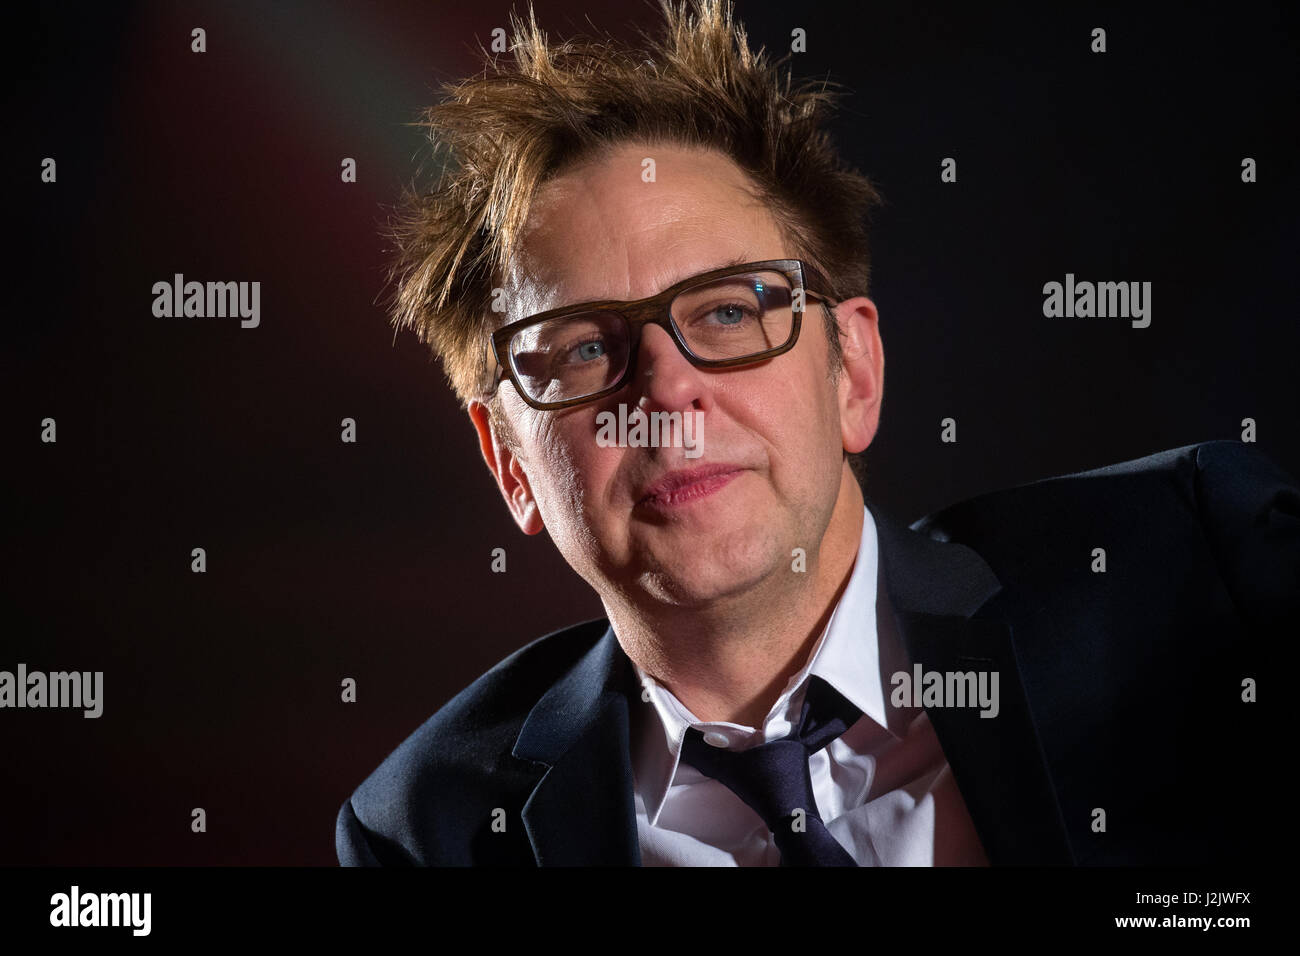 Moscow, Russia. 27th Apr, 2017. At the premiere 'Guardians of the Galaxy Vol. 2' film at the KARO 11 Oktyabr Cinema at scene american film director James Gunn. Stock Photo